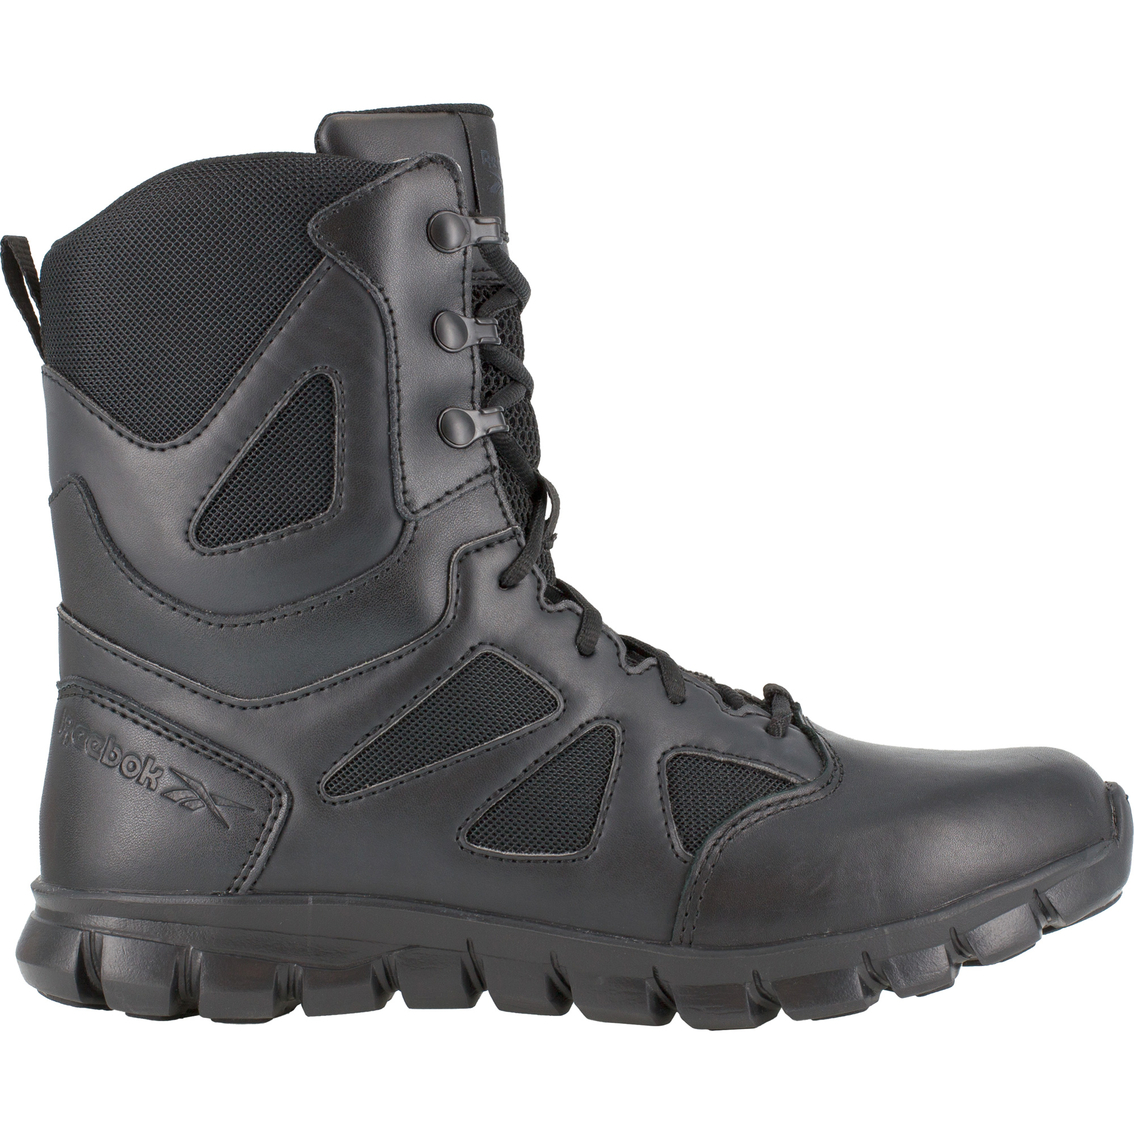 Reebok Sublite Cushion 8 in. Tactical Boots - Image 3 of 5